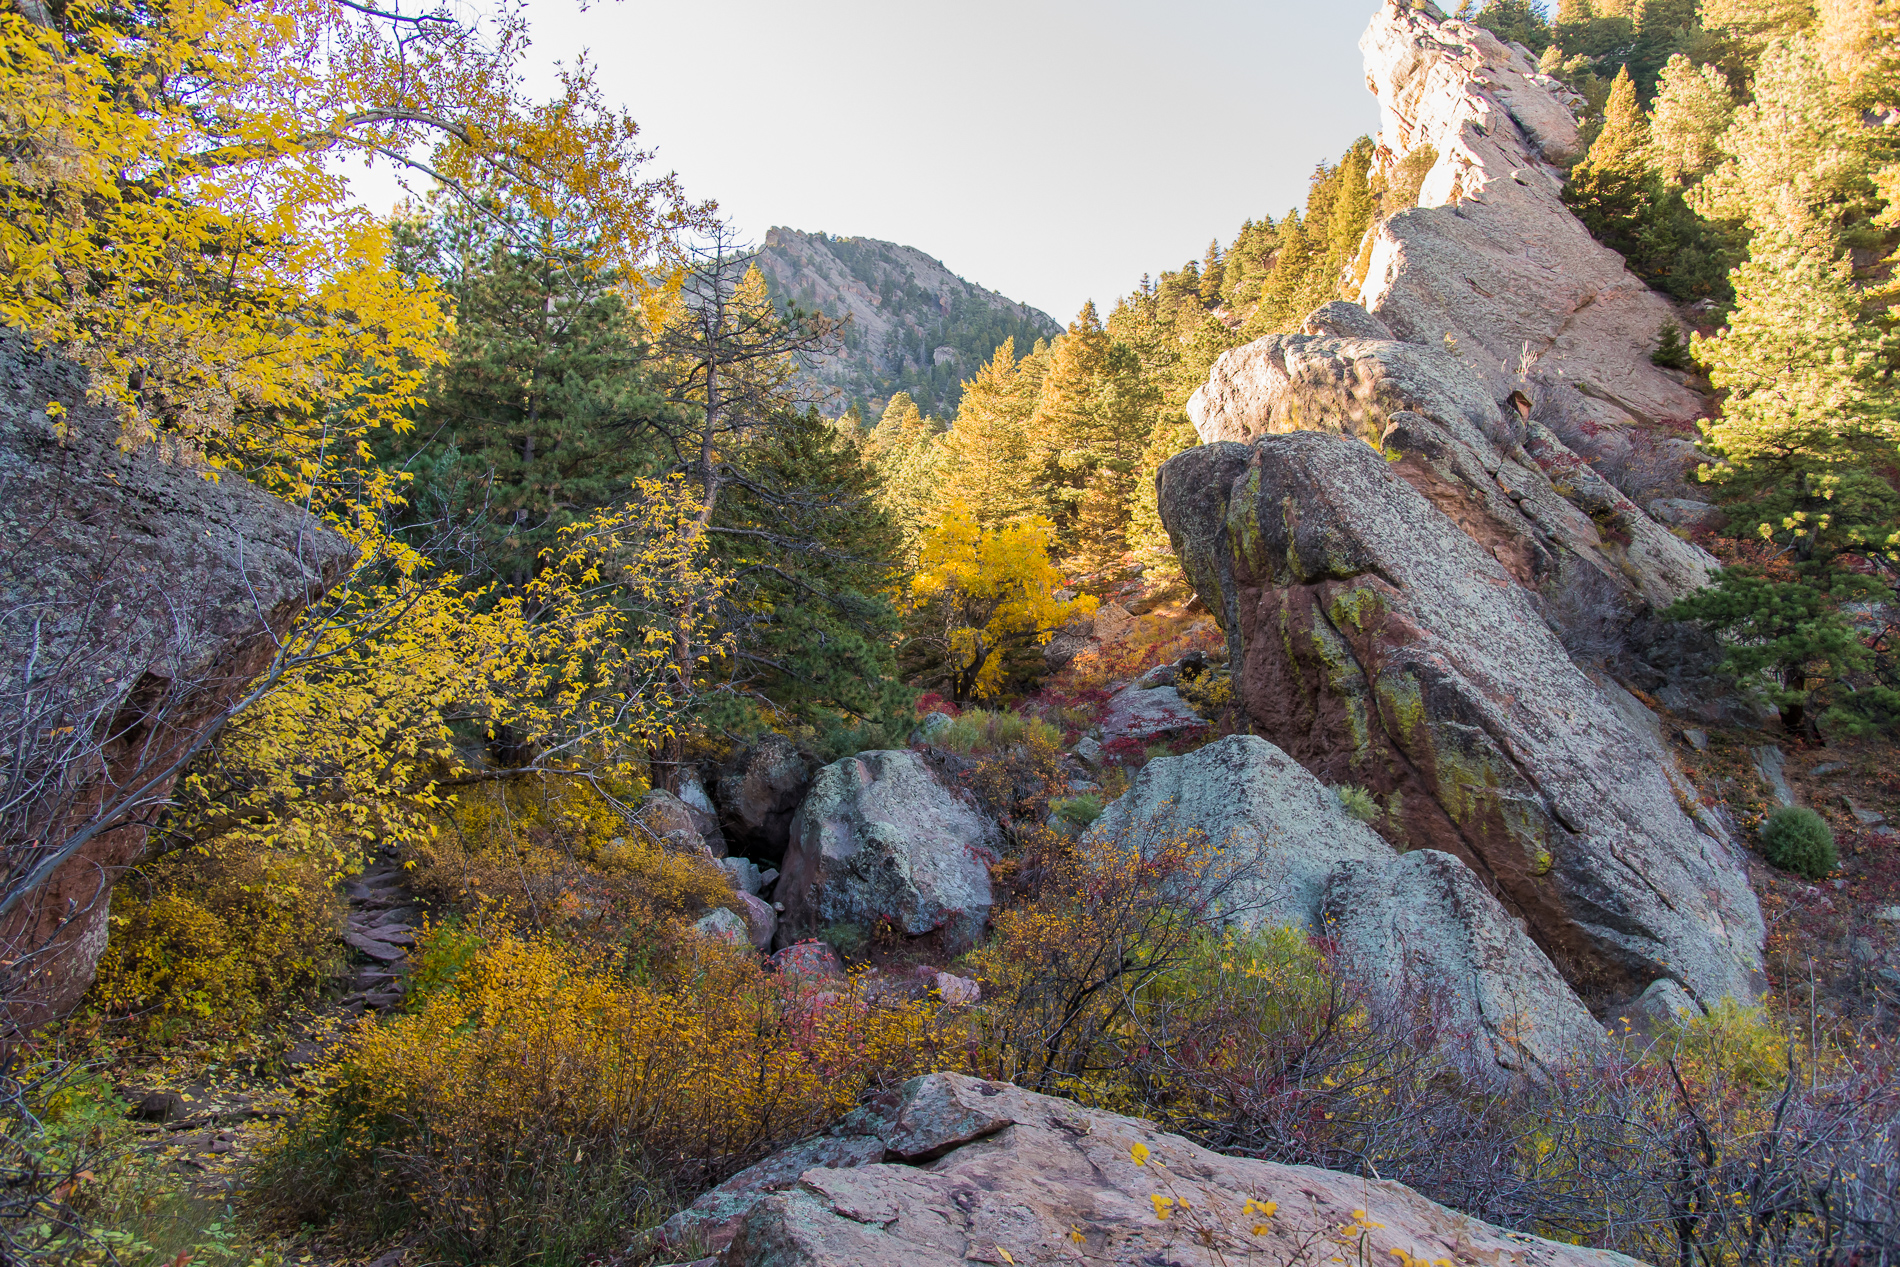 Rock formations in Autumn from Bear Canyon Trail